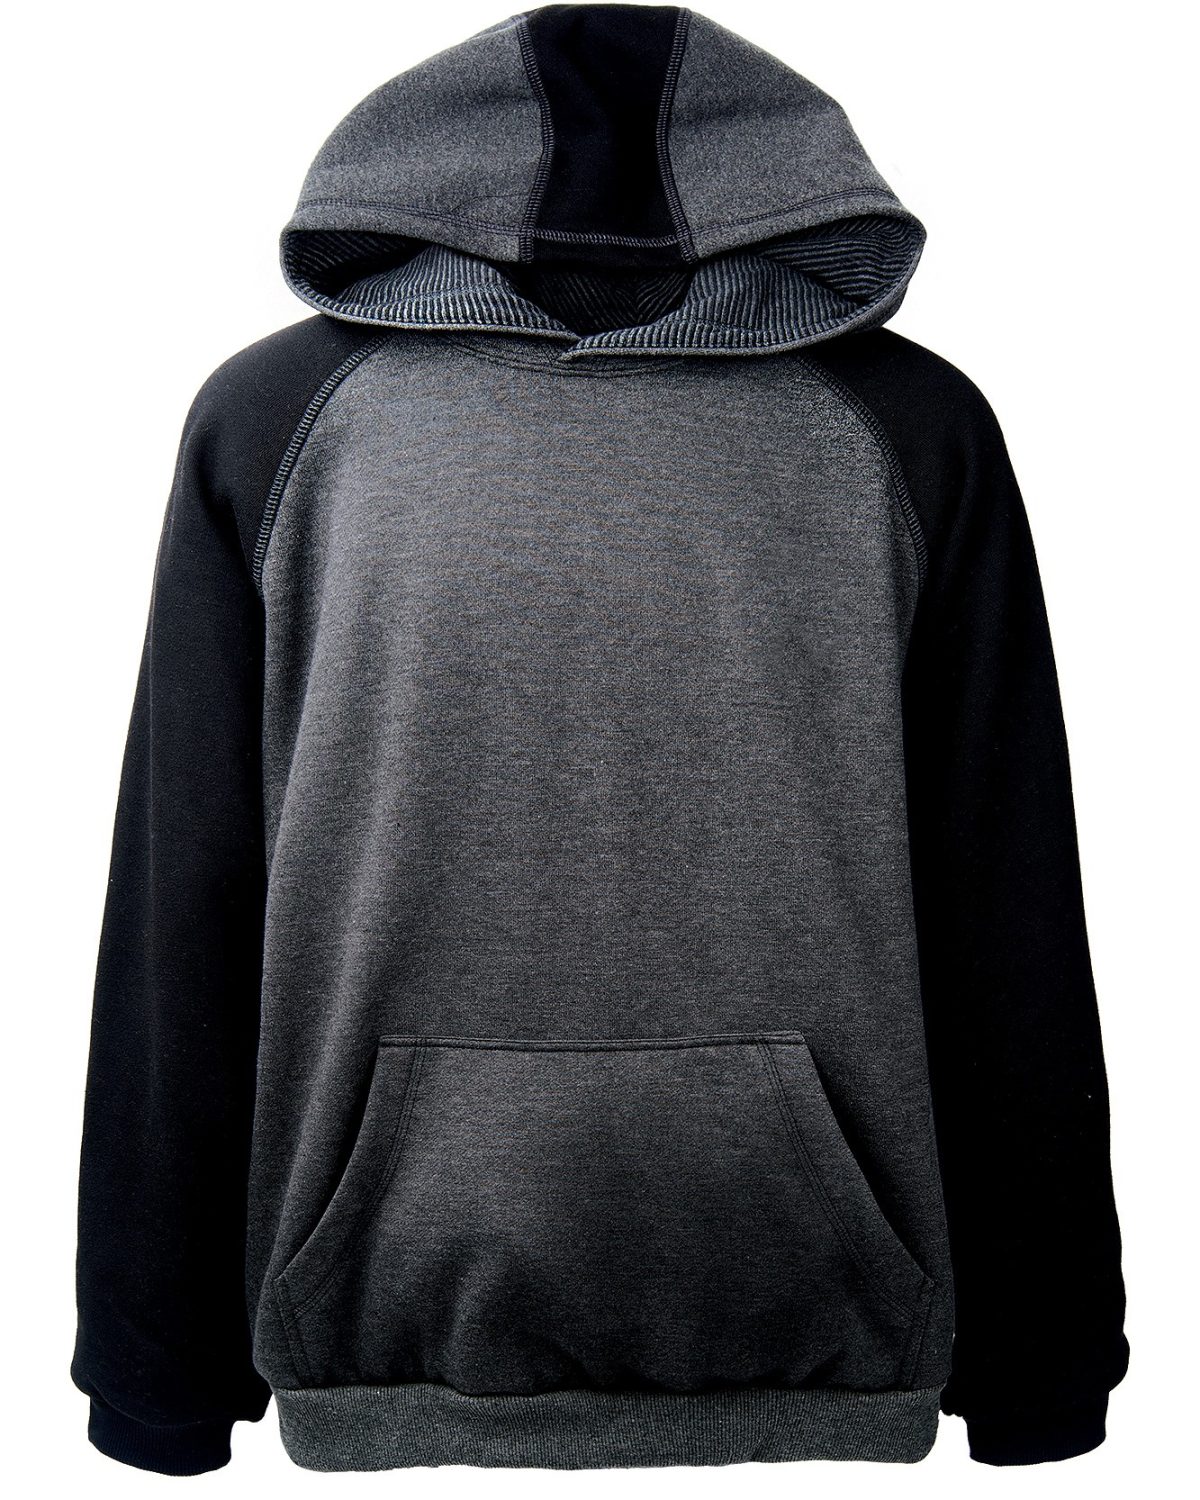 Two-Tone Pullover Hooded Sweatshirt